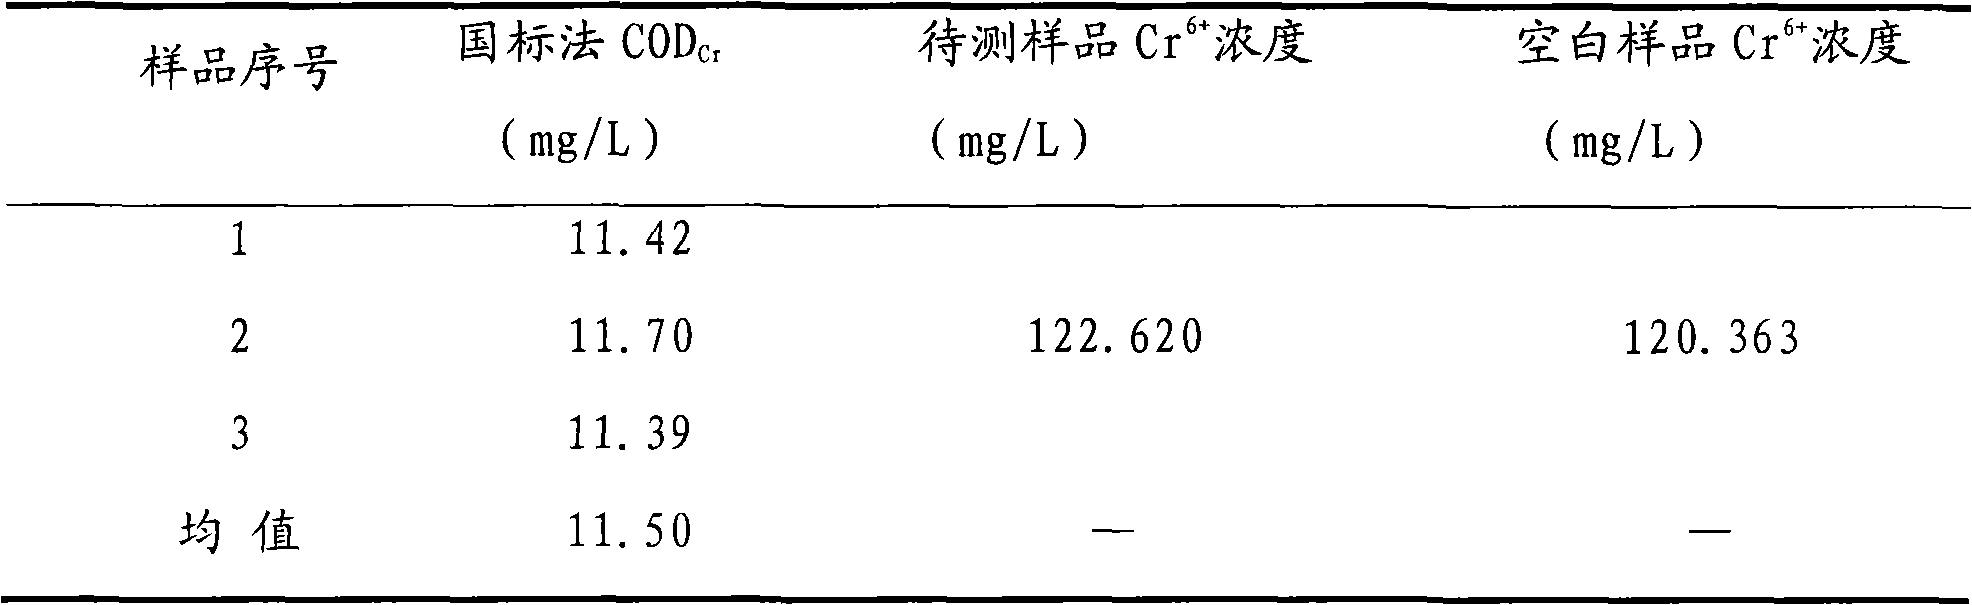 Chemical oxygen demand determination method for water bodies